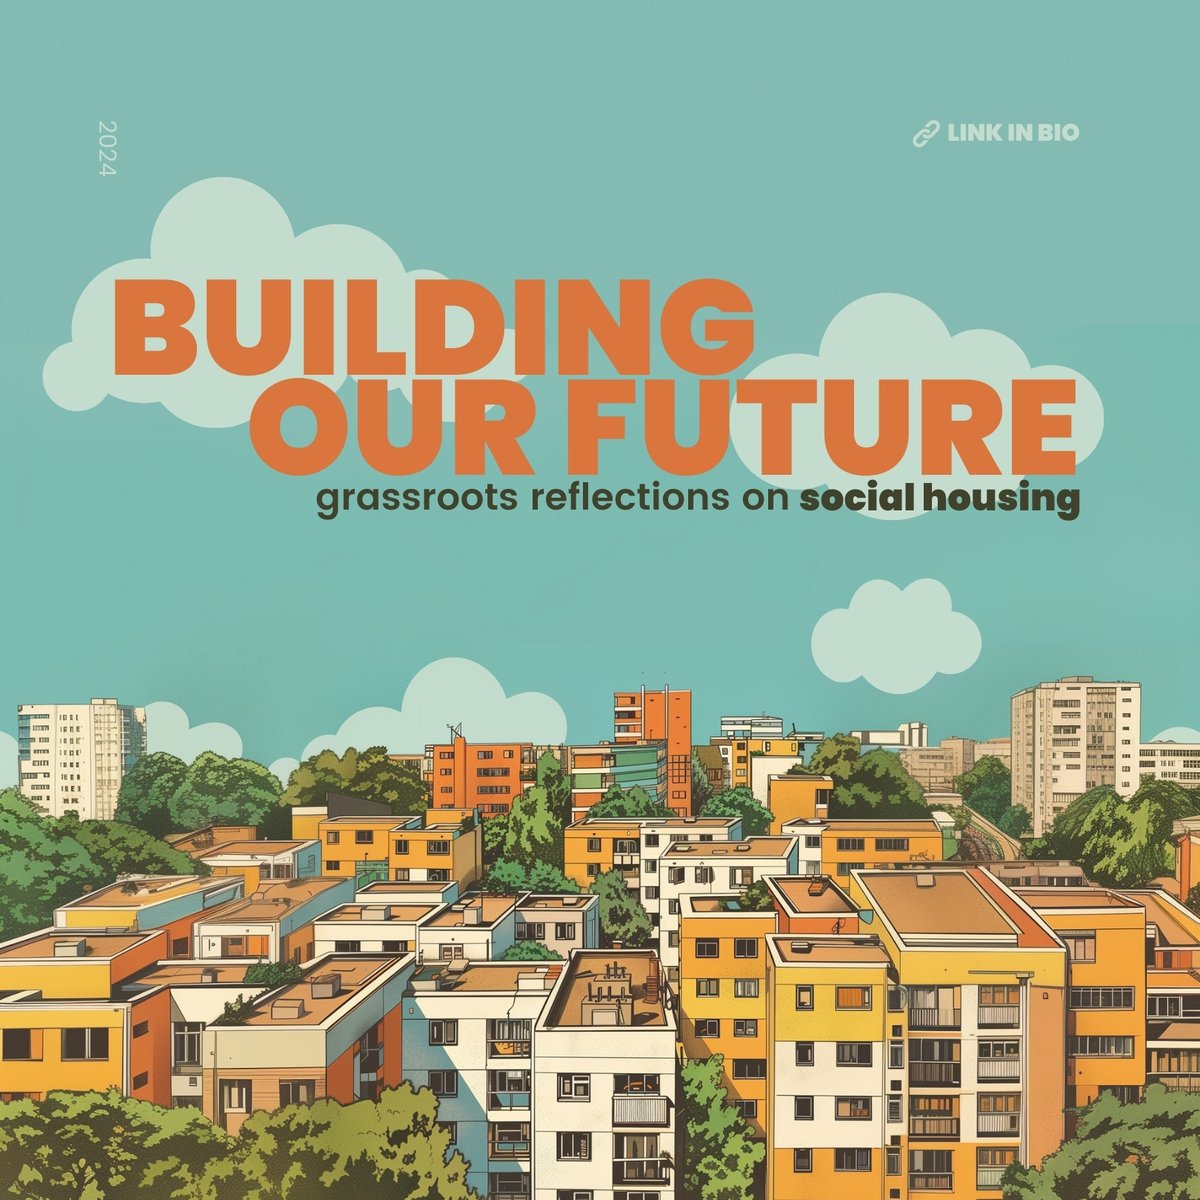 🚨Just released! New report highlighting the growing grassroots movements and communities across the country fighting for #SocialHousing Read the full report here: drive.google.com/file/d/1QlnTdb… #BuildingOurFuture